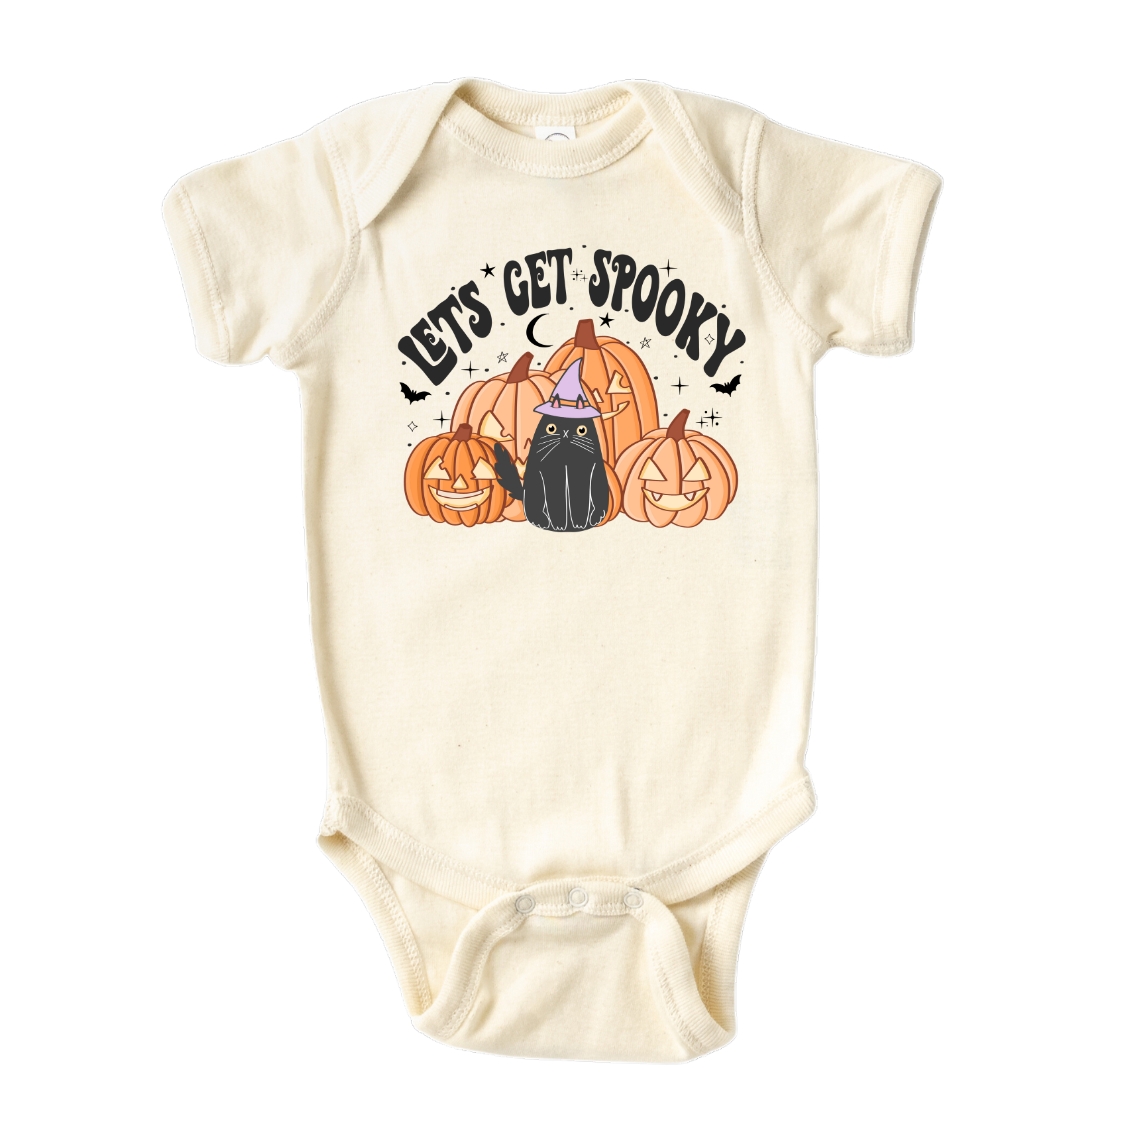 baby girl onesies funny baby onesies baby announcement onesie personalized baby girl gifts custom baby onesie infant clothes cute baby girl clothes funny baby clothes newborn onesies unisex newborn boy onesies funny onesies for babies baby essentials baby boy clothes newborn essentials must haves